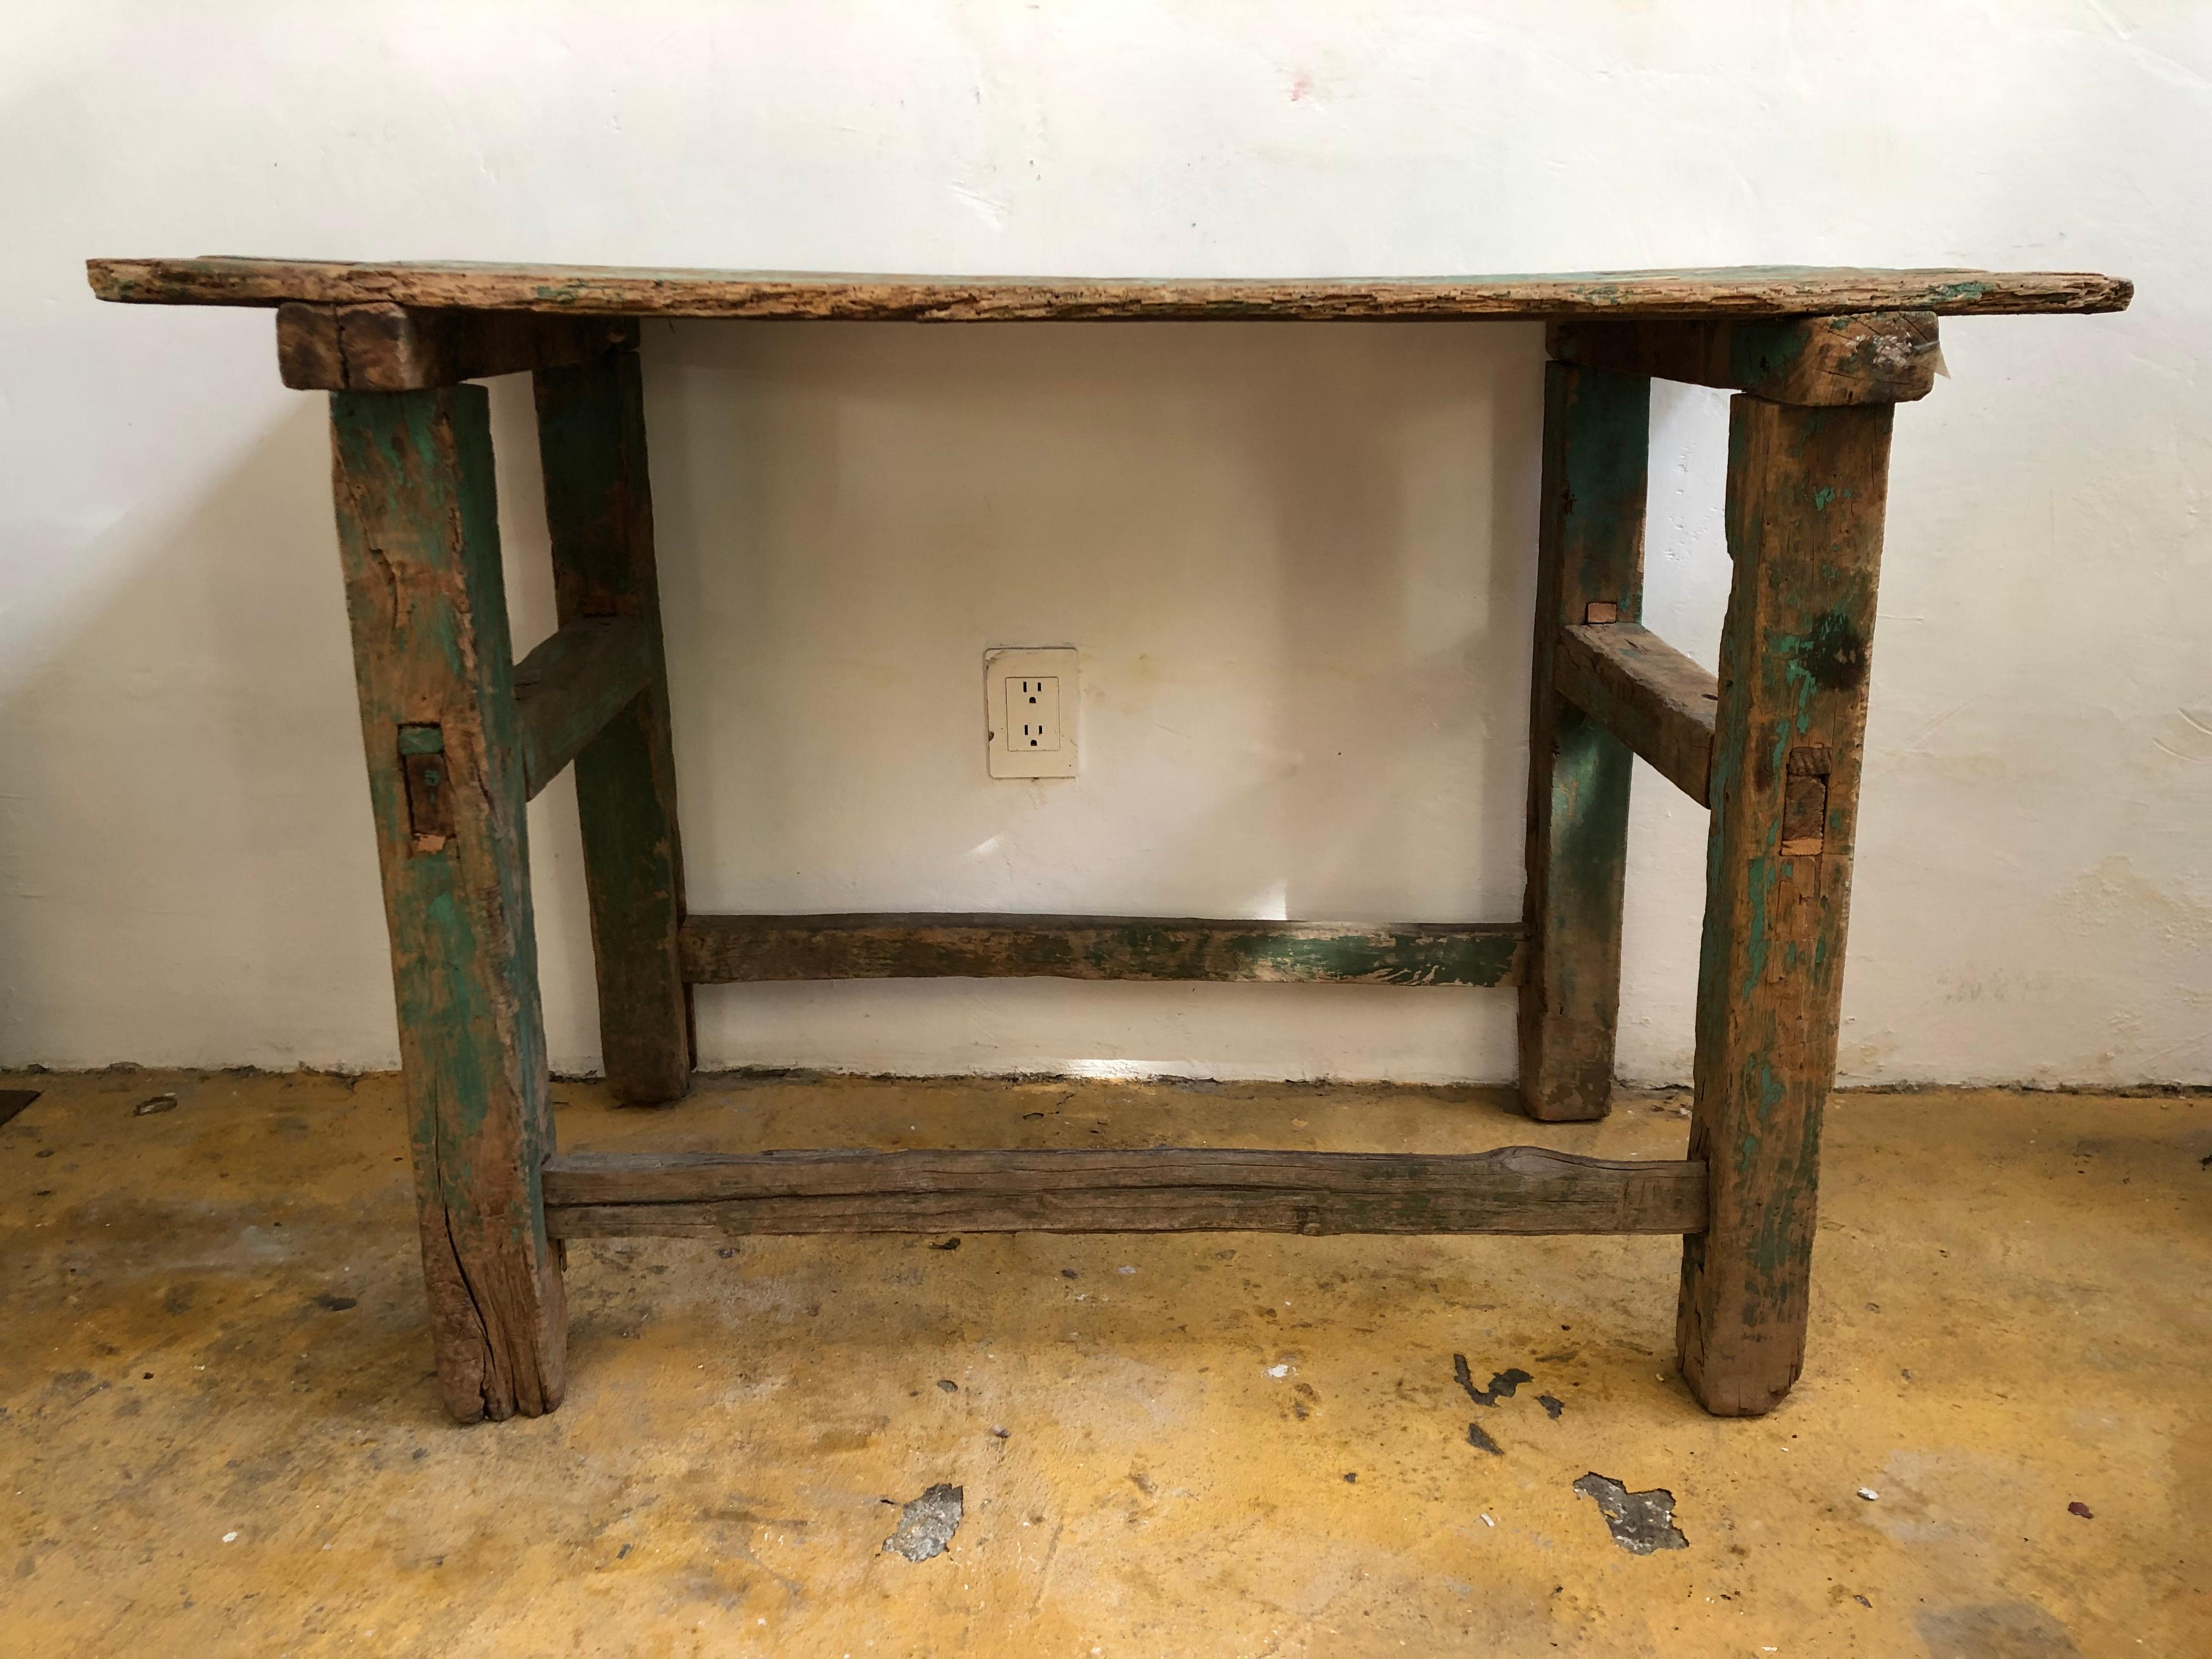 This beautiful sabino wood table was found in Zacatecas, Mexico.
It’s perfect for a side table, the rests of bright green paint and the texture of the hand carved structure, gives this table an amazing patina.